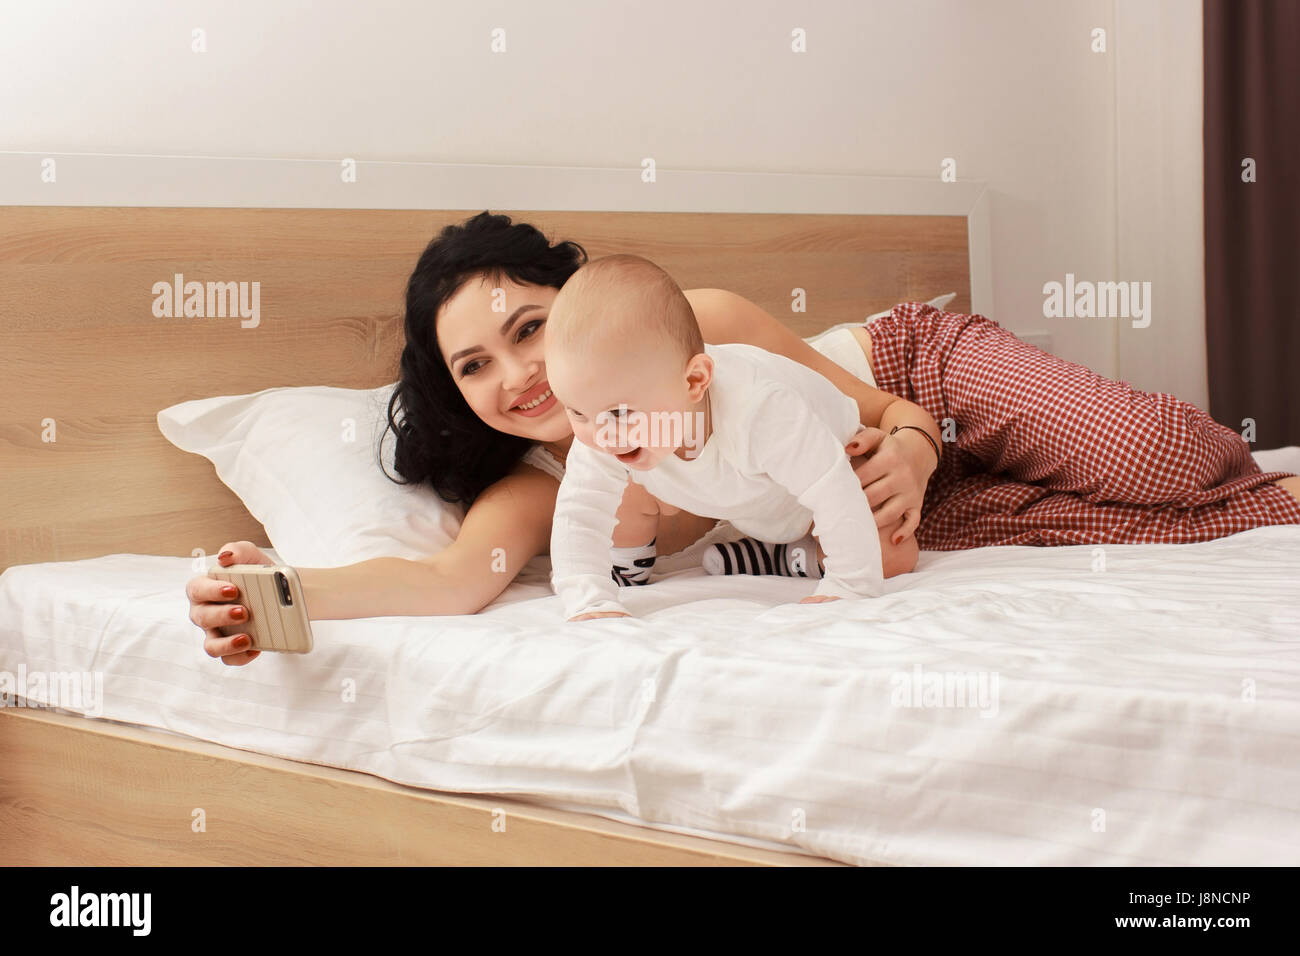 Happy smiling mother and baby lying on bed Banque D'Images